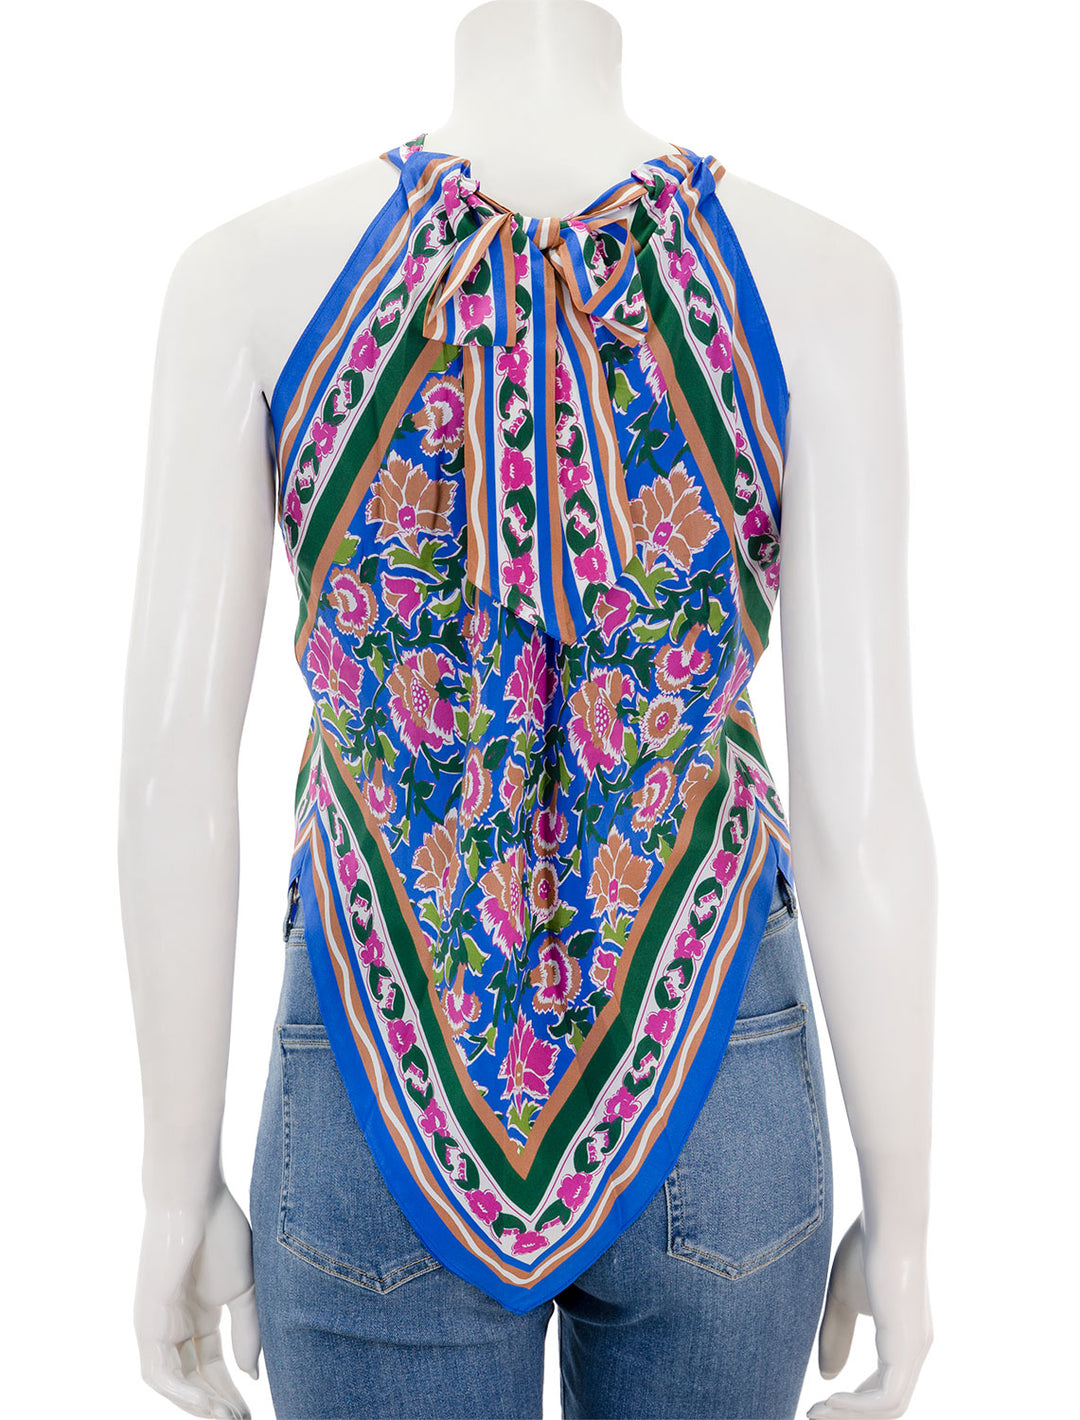 Back view of Veronica Beard's raphael top in sarong floral print.